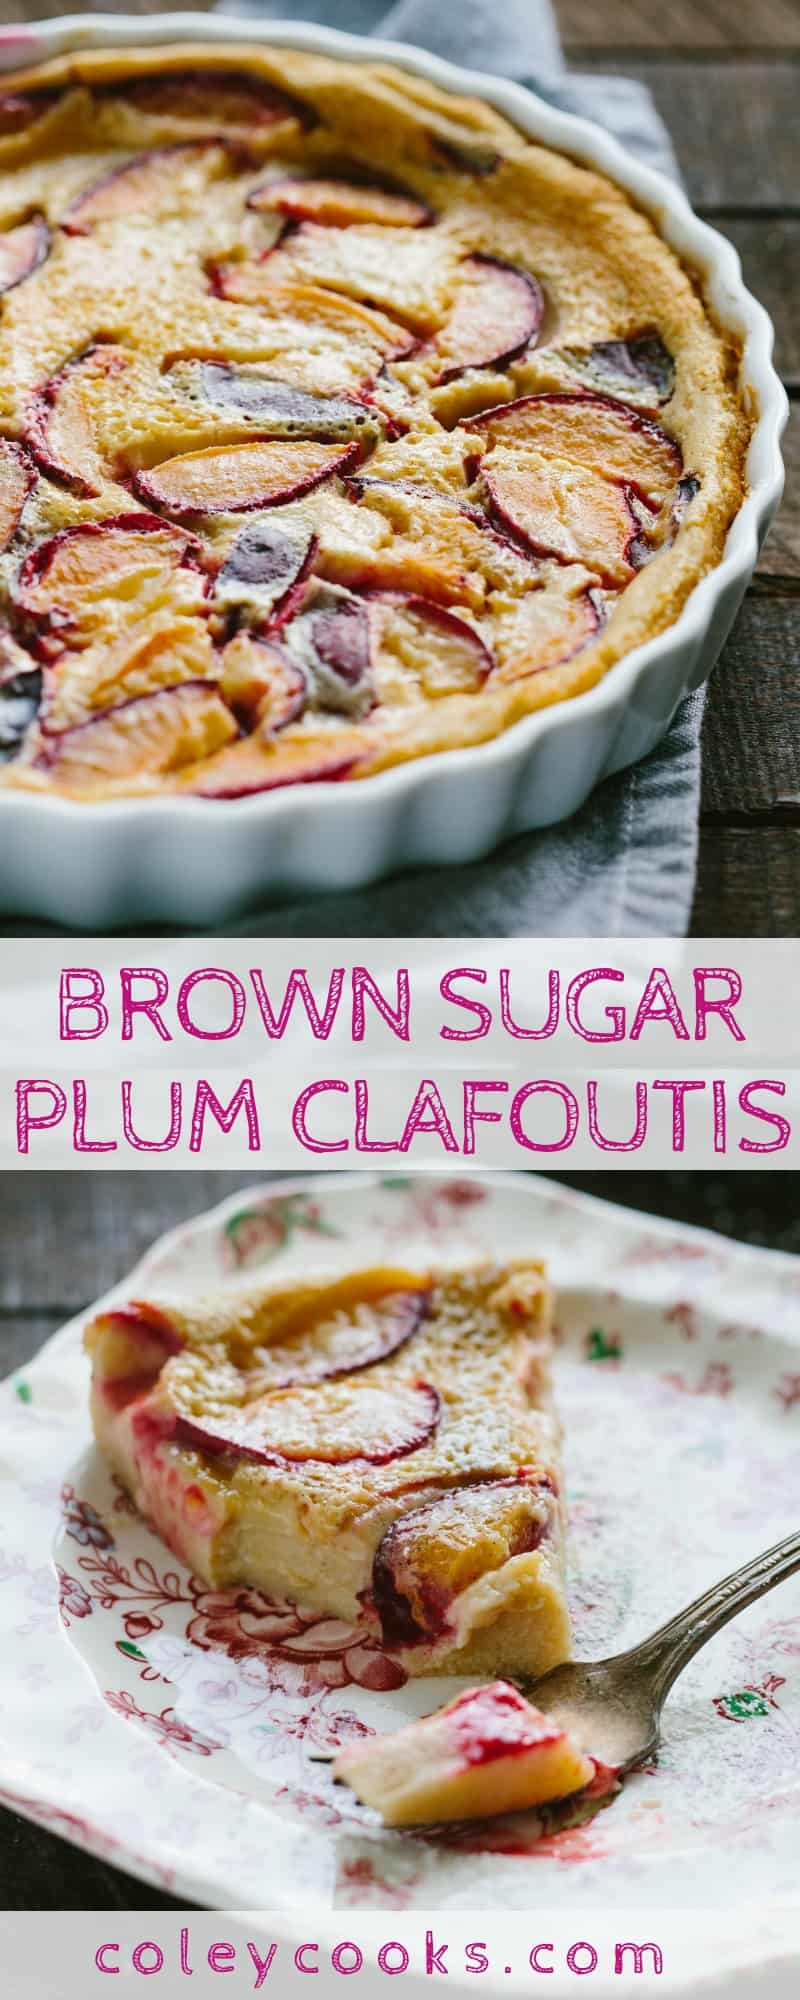 BROWN SUGAR PLUM CLAFOUTIS | This easy and elegant classic French dessert is silky, custardy, and full of juicy fresh plums. #french #dessert #easy #fruit #custard #elegant #egg #clafoutis #plums #recipe | ColeyCooks.com